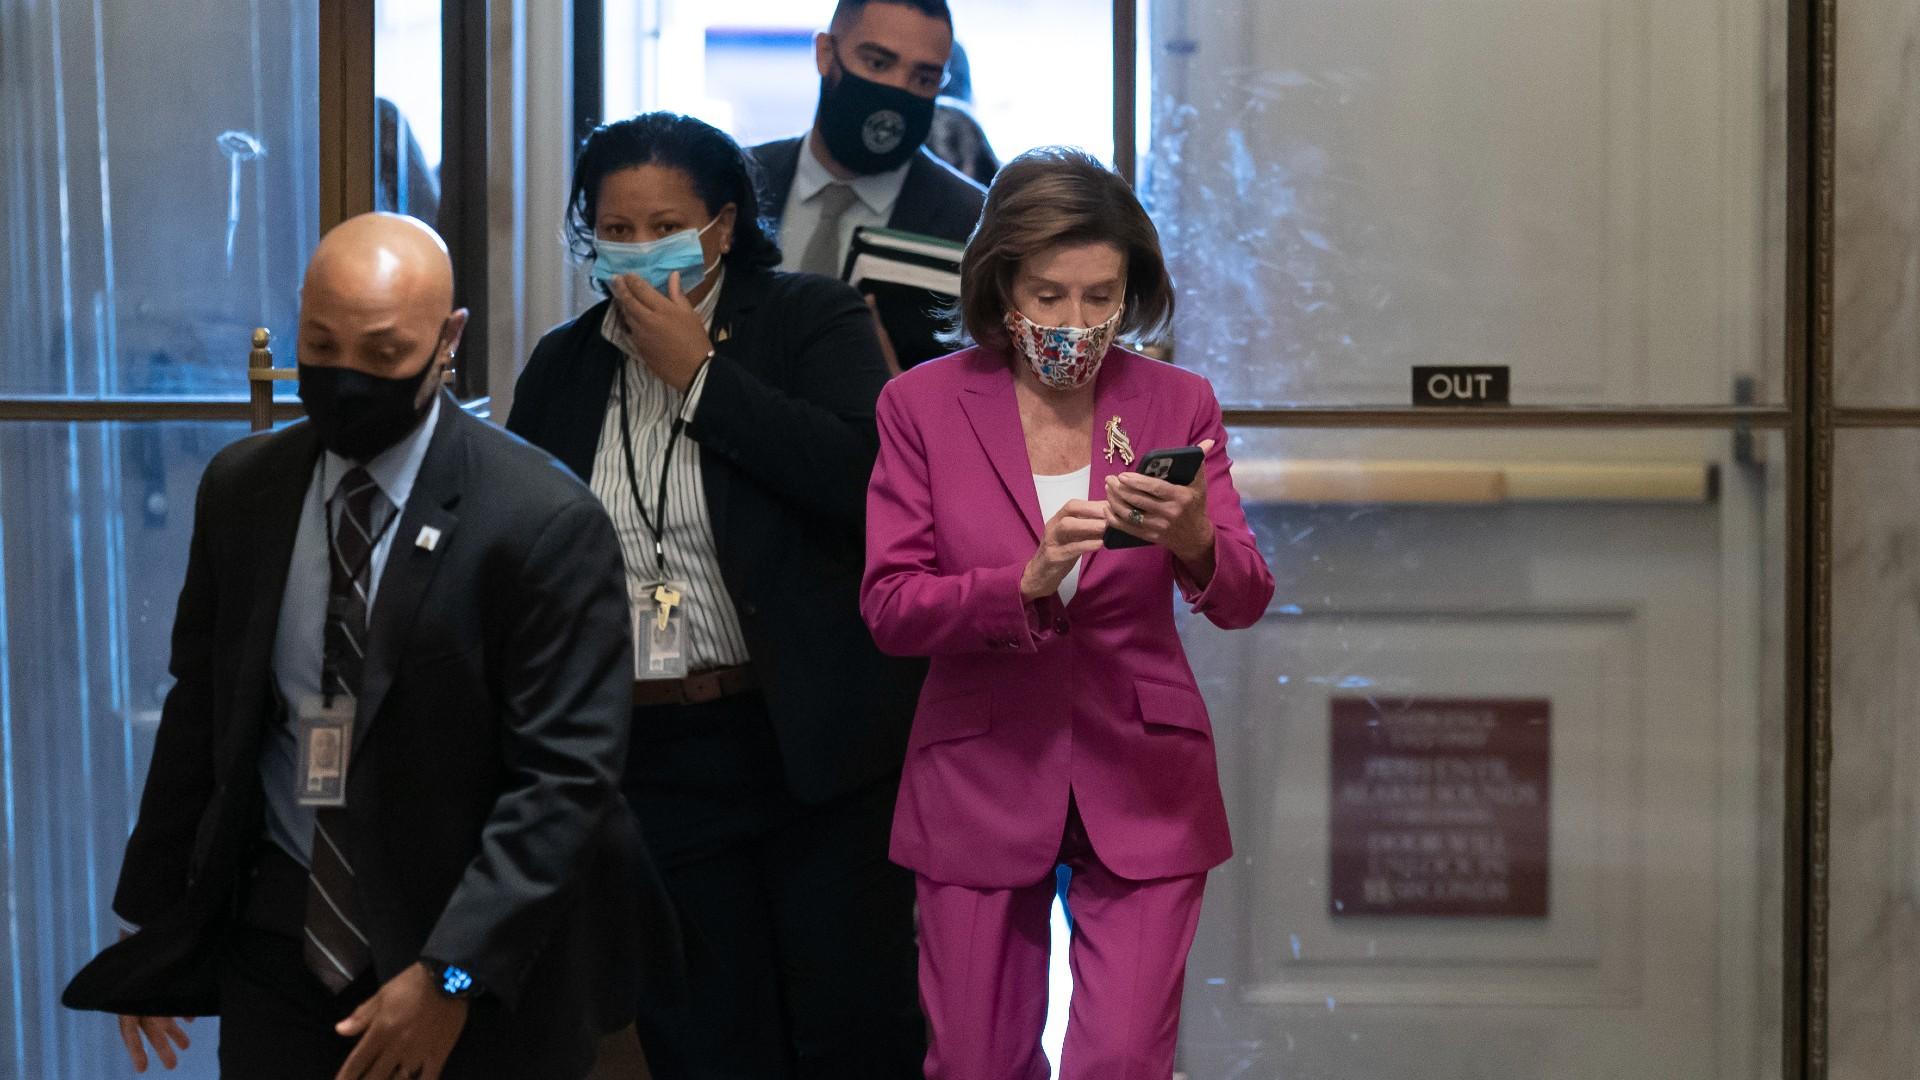 Speaker of the House Nancy Pelosi, D-Calif., arrives to lead Democrats in advancing President Joe Biden's .85 trillion-and-growing domestic policy package, at the Capitol in Washington, Friday, Nov. 5, 2021.   (AP Photo / J. Scott Applewhite)